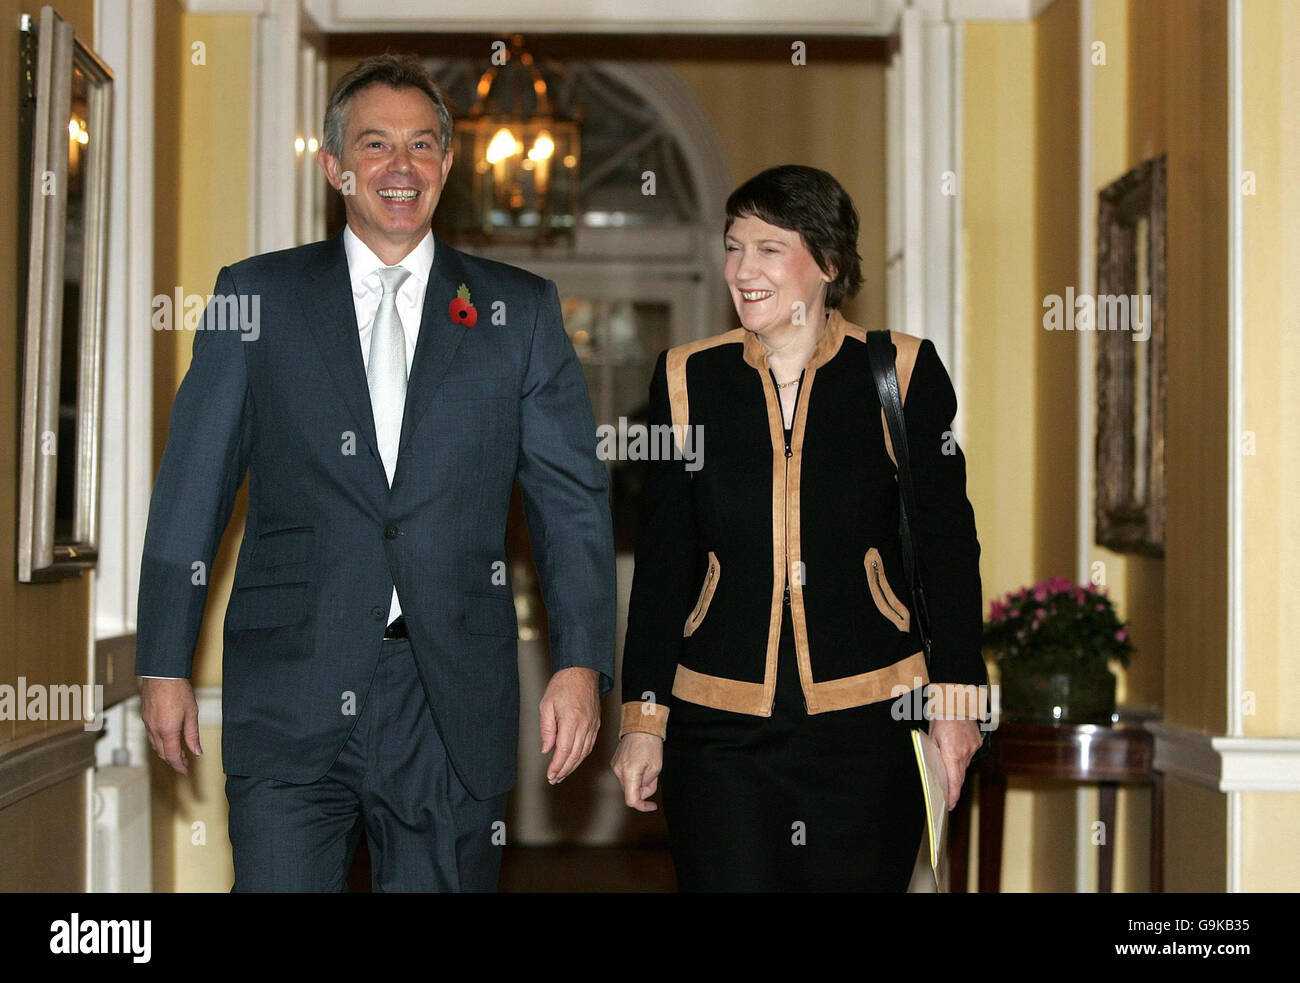 Britain's Prime Minister Tony Blair with his New Zealand counterpart Helen Clark inside 10 Downing Street, as they meet for talks. Stock Photo